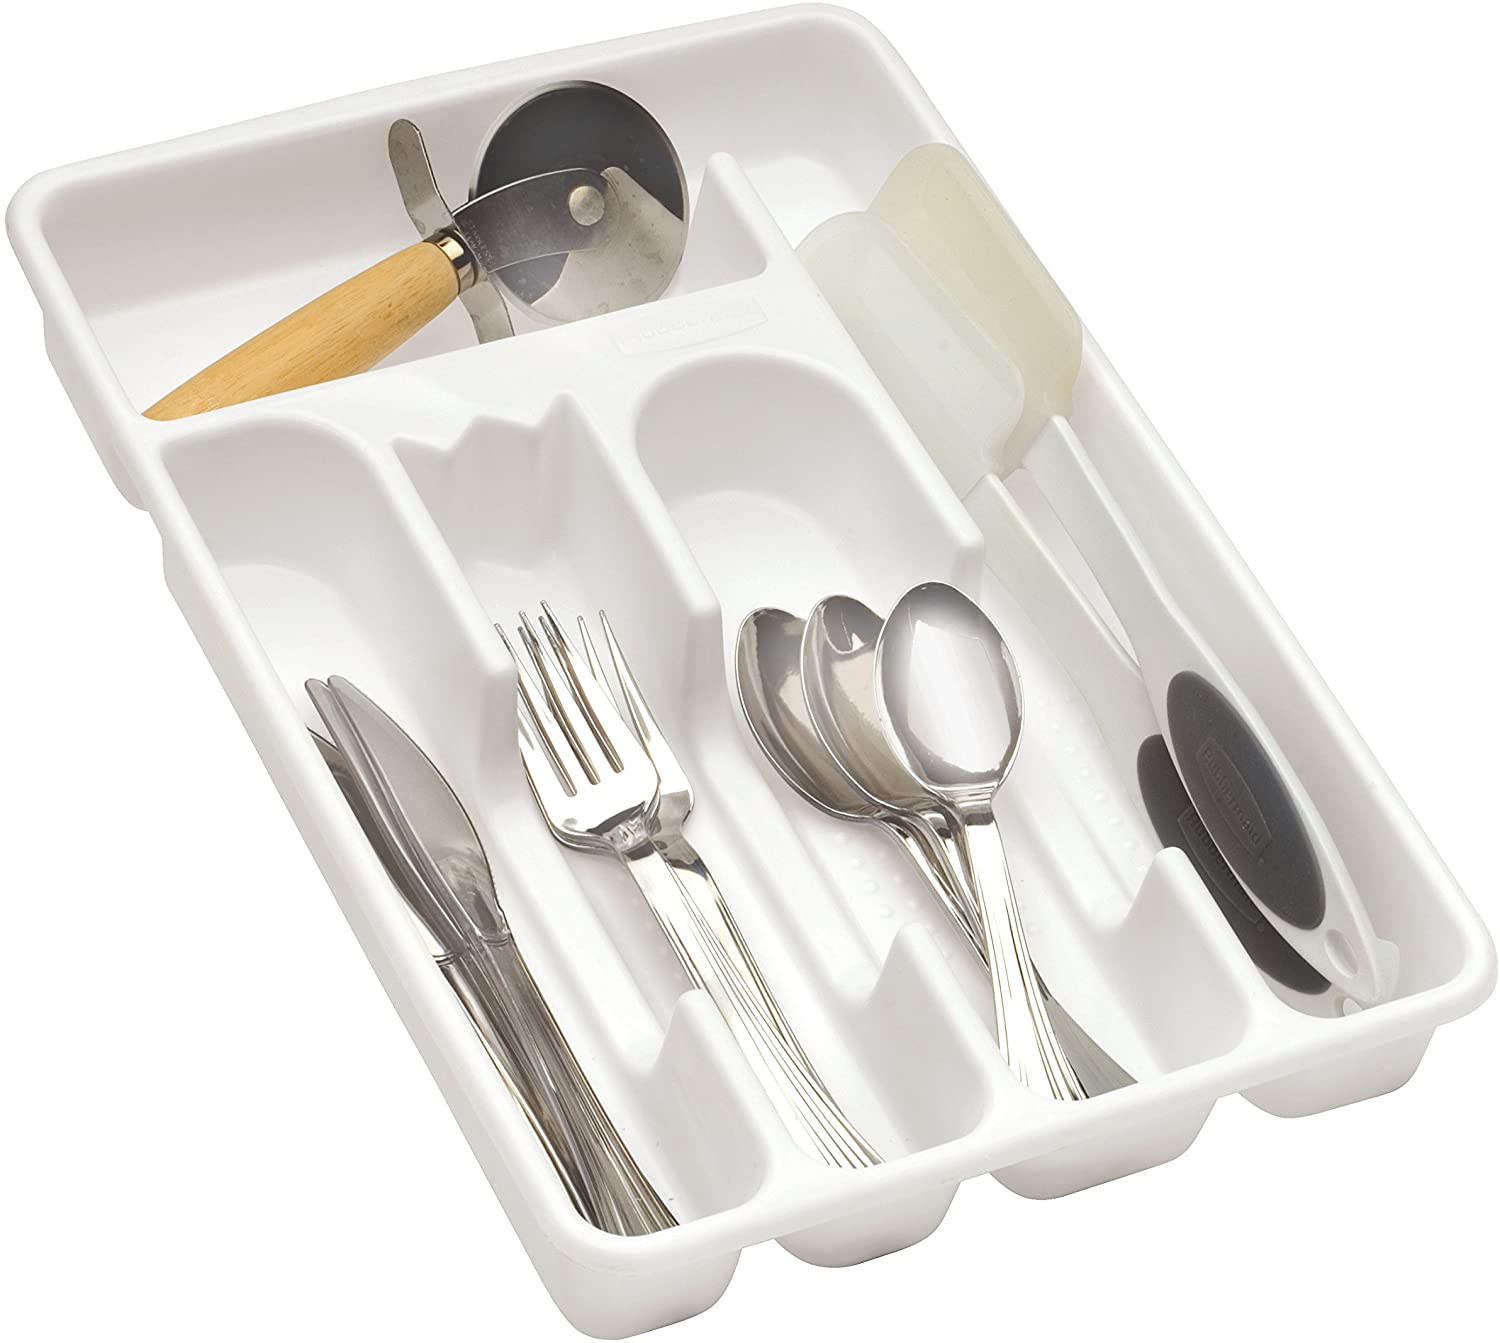 Rubbermaid Small Cutlery Tray, White - Whole and All